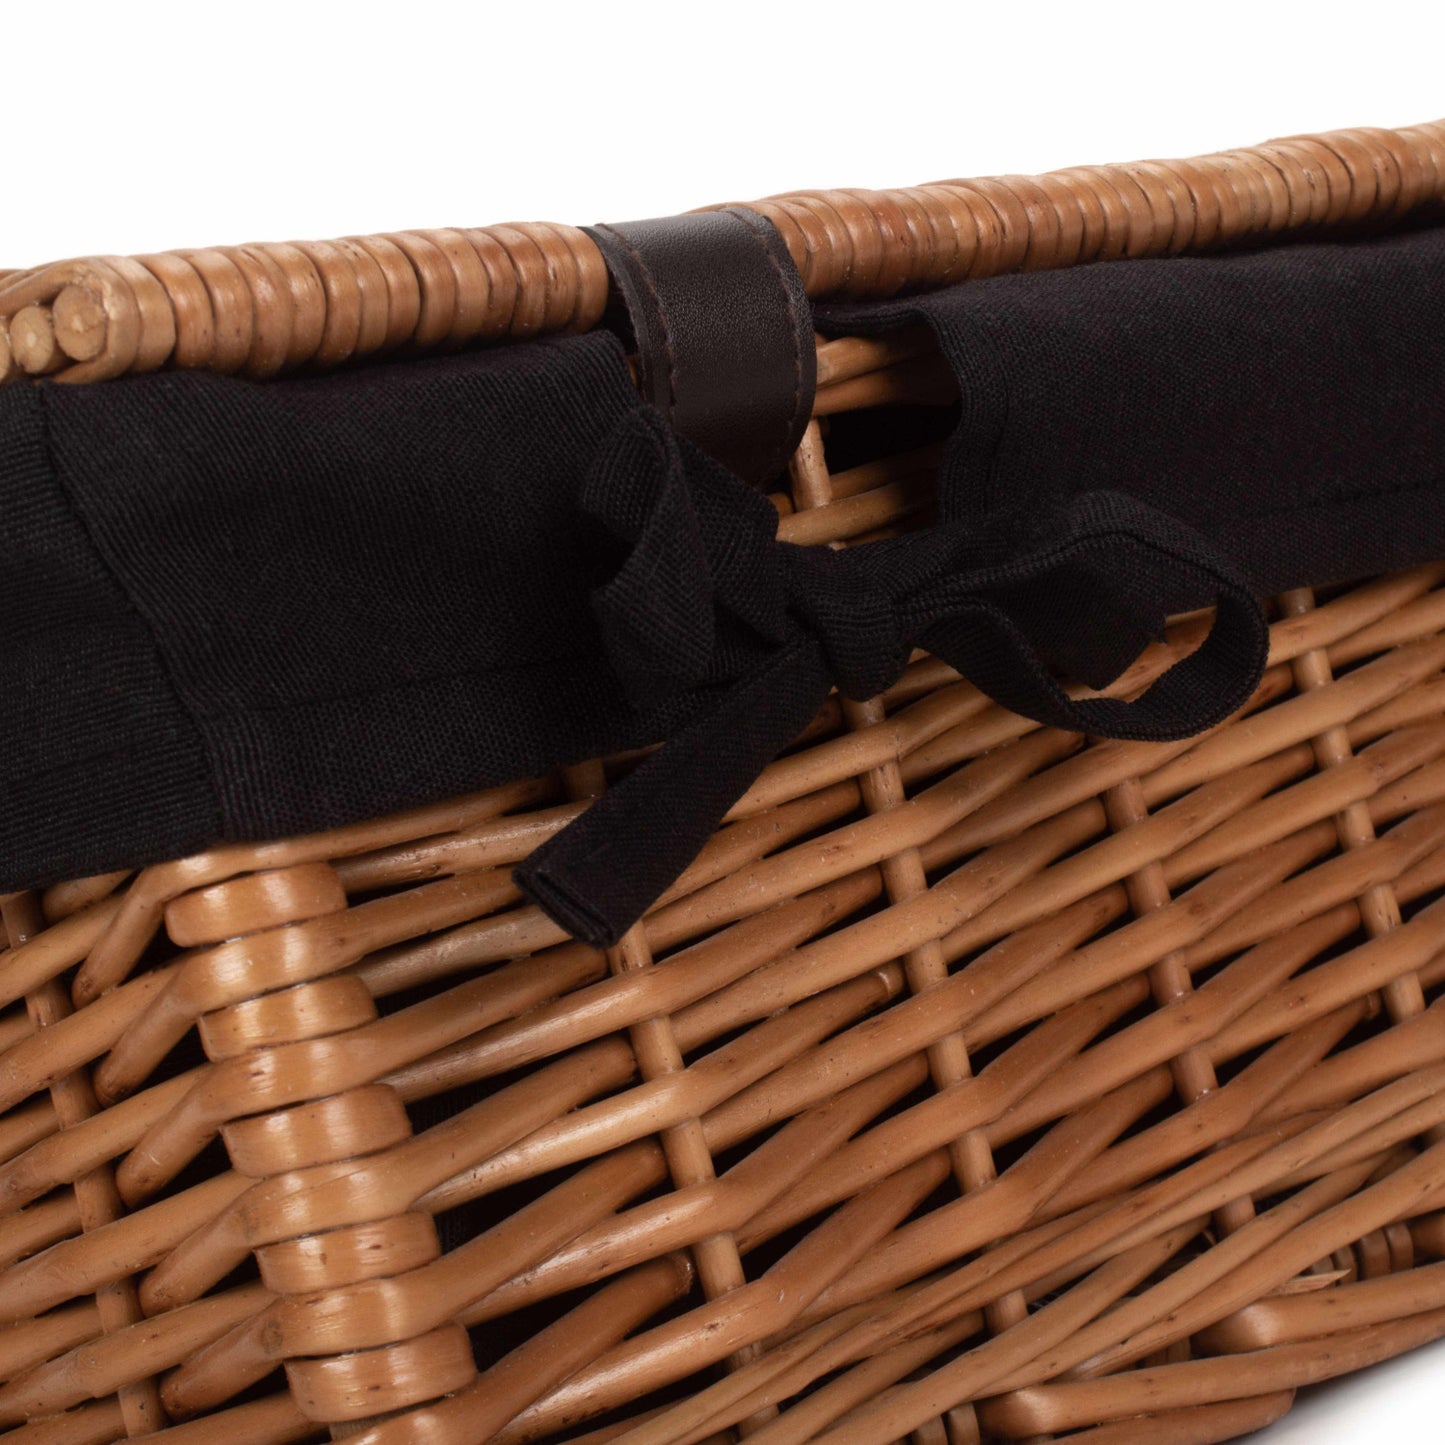 14 Inch Double Steamed Hamper With Black Lining